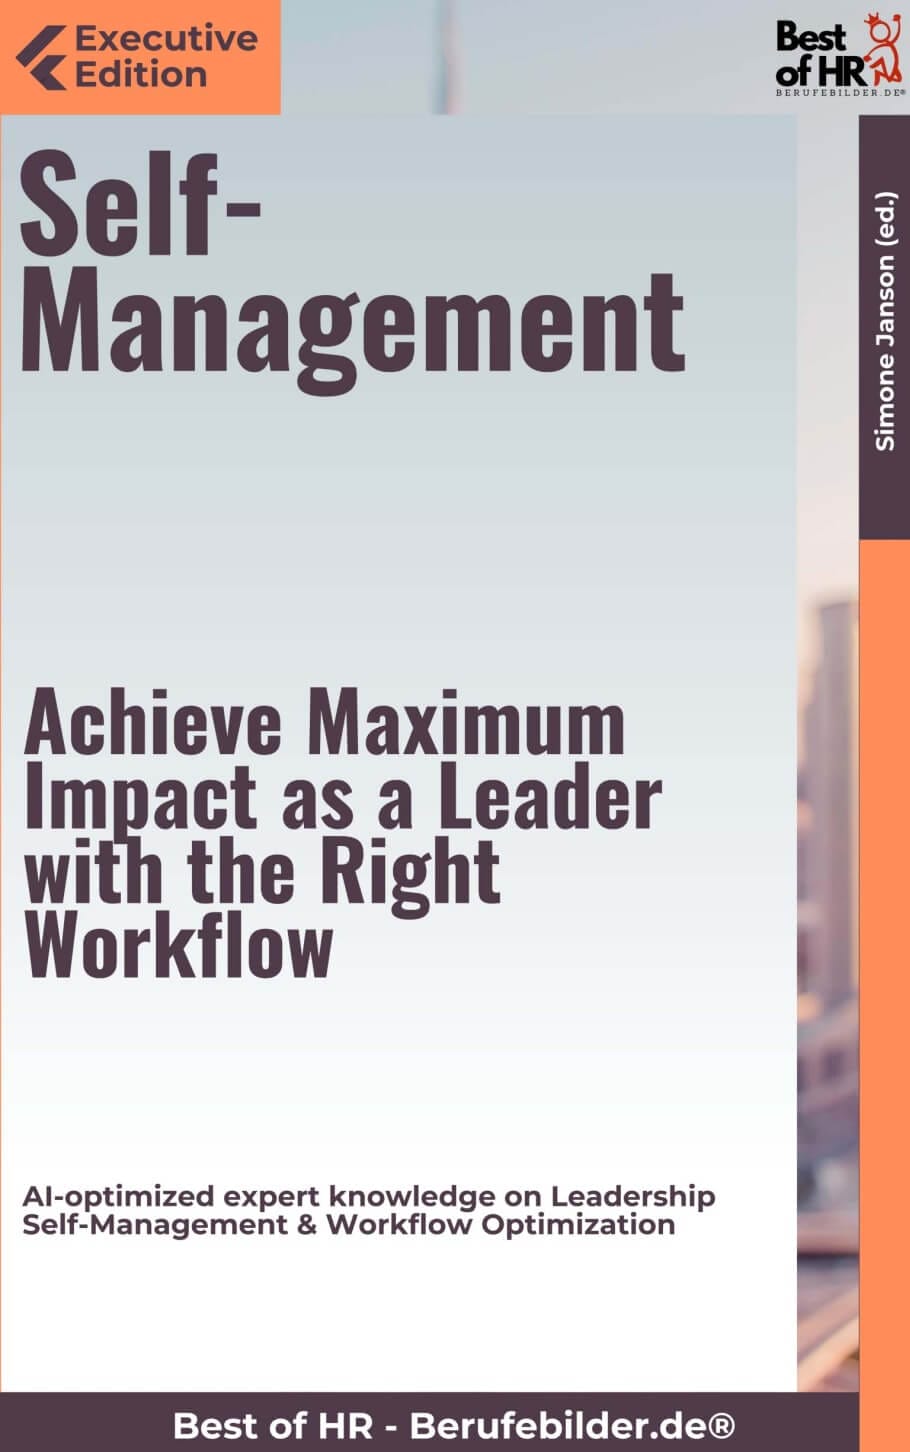 Self-Management – Achieve Maximum Impact as a Leader with the Right Workflow (Engl. Version)